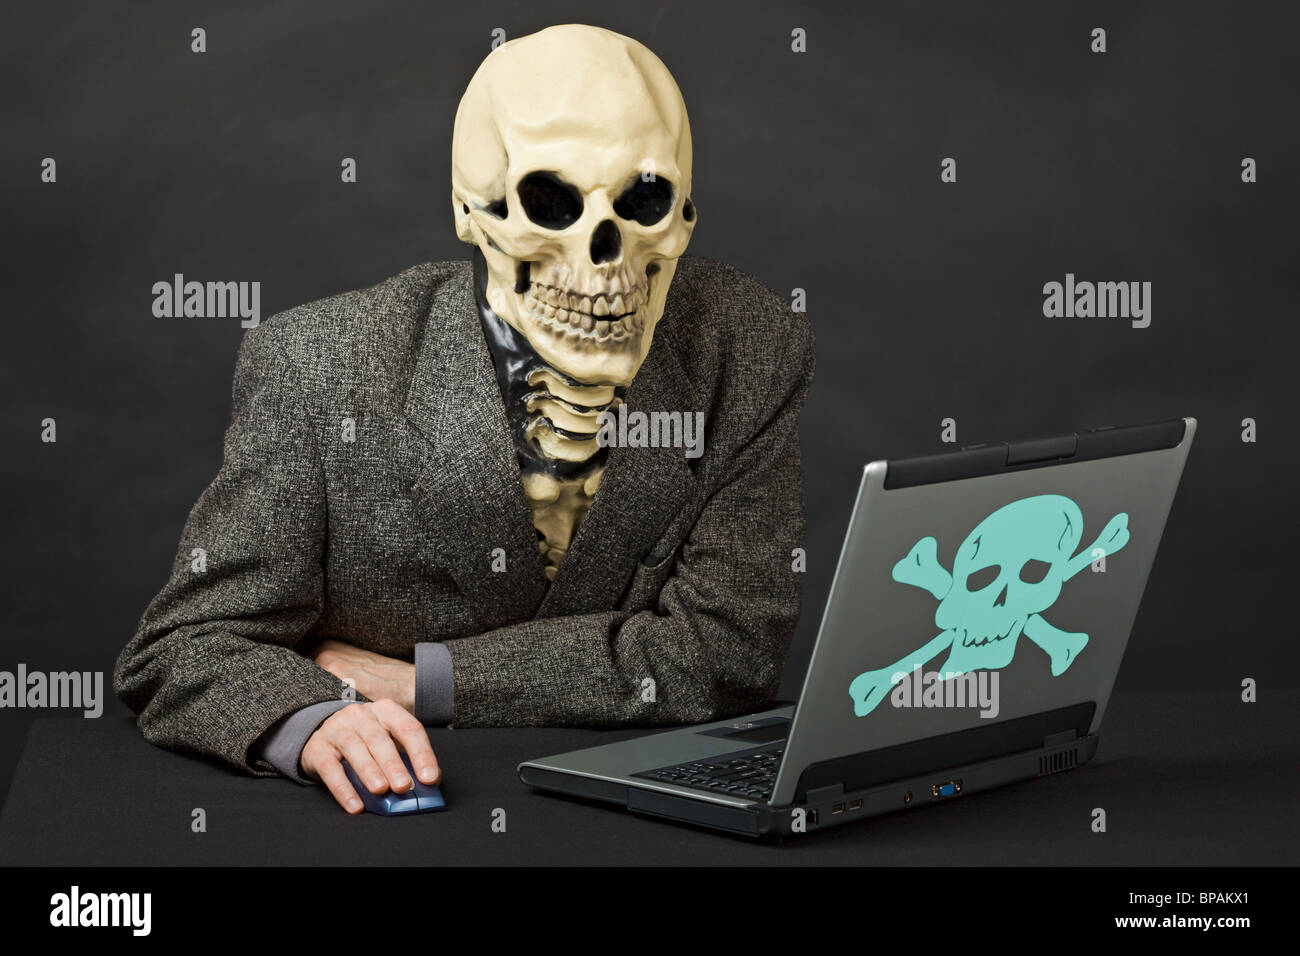 About the mortal danger computers and the Internet Stock Photo